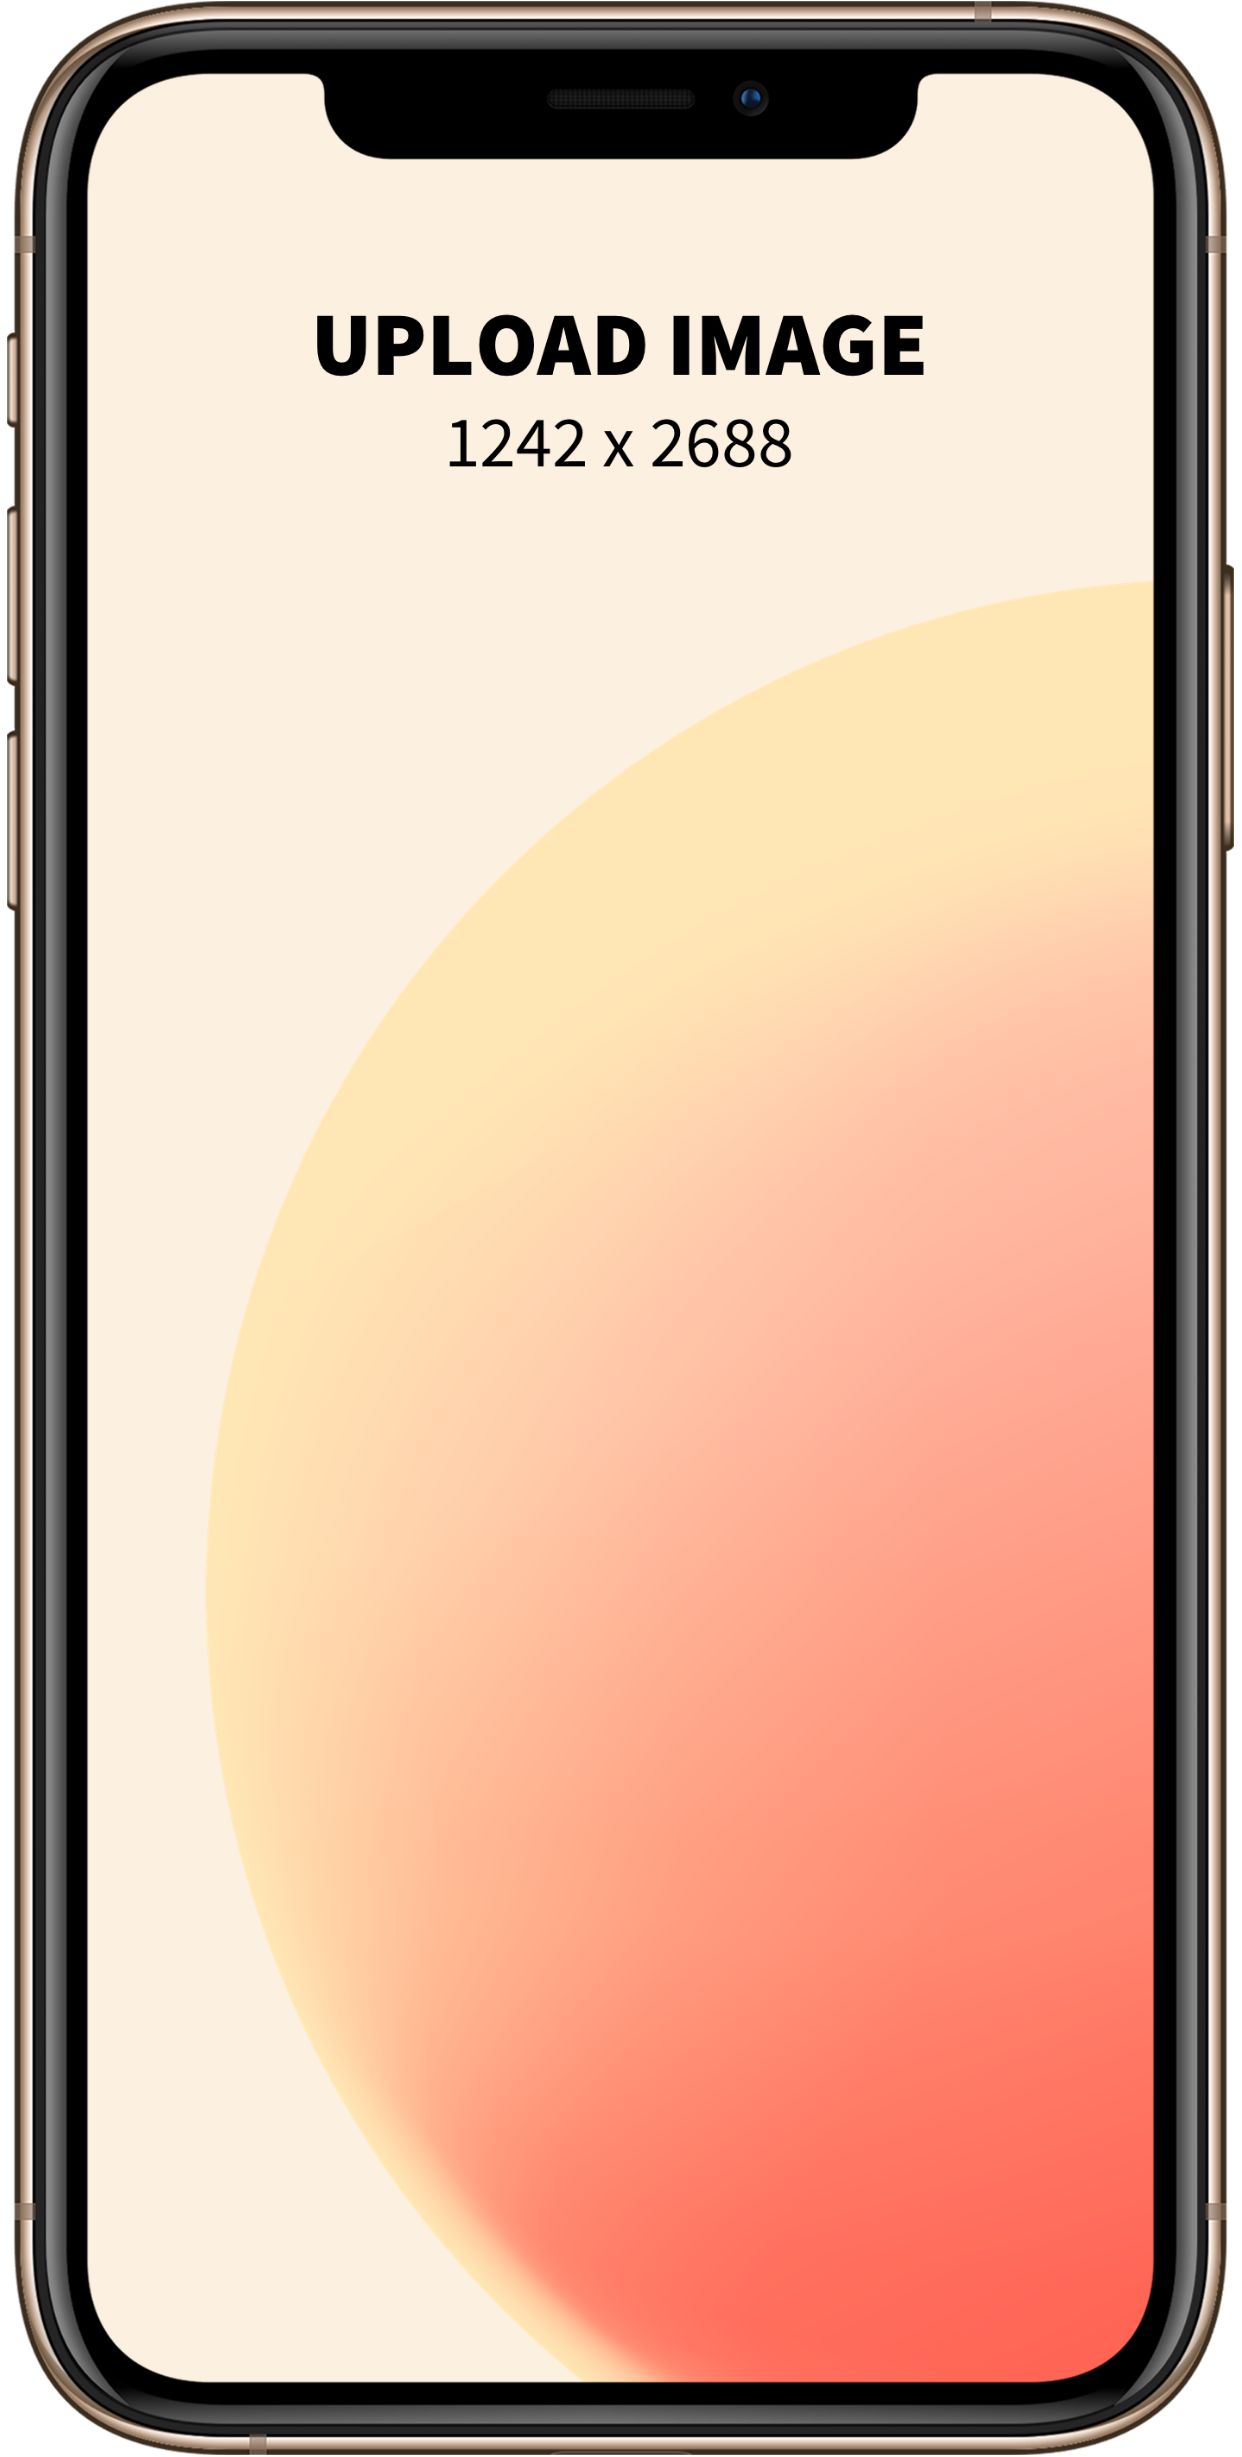 iPhone XS Max Mockup 7 template. Quickly edit text, colors, images, and more for free.